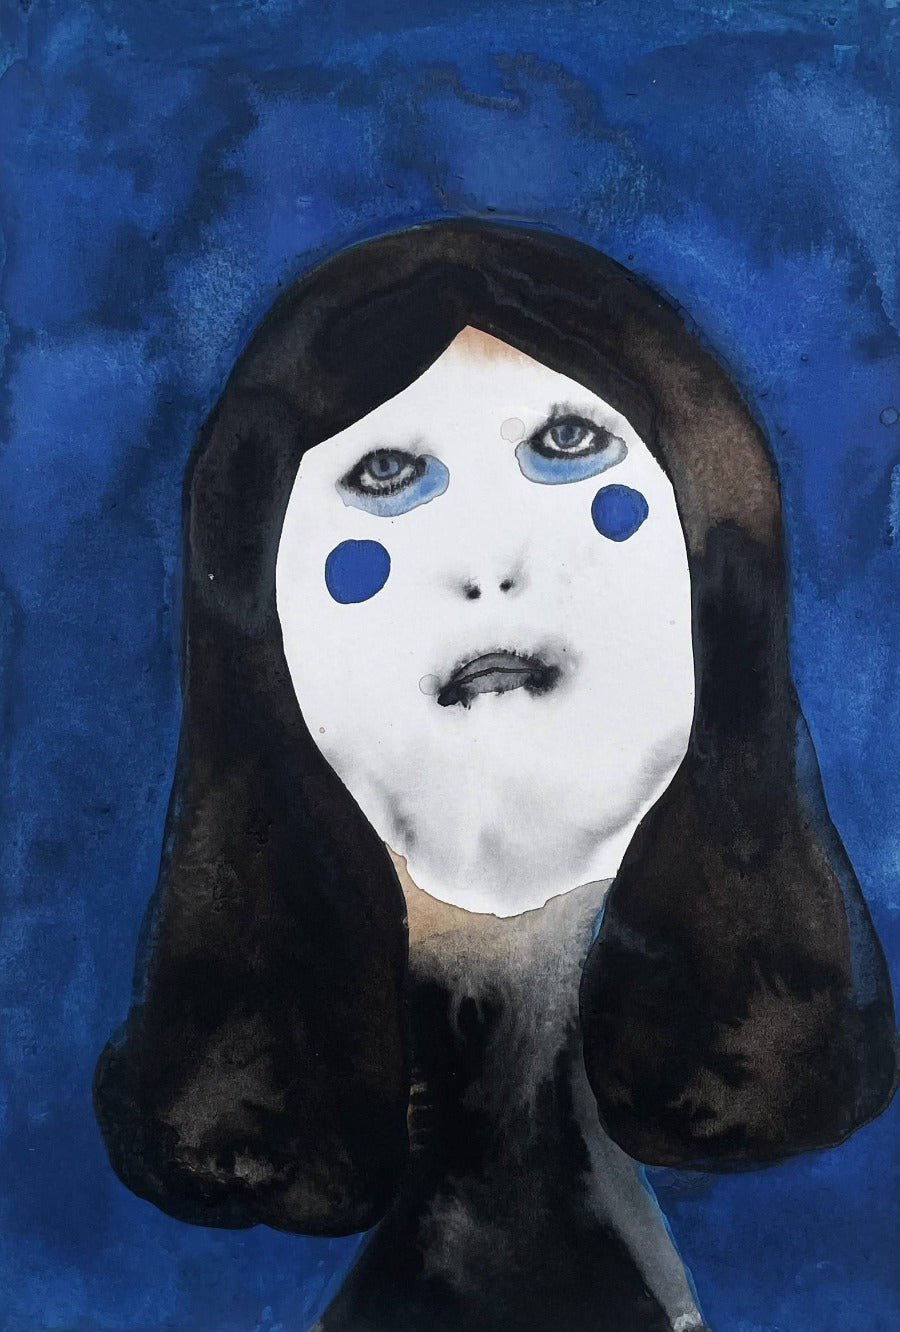 Sad Eyes by Bliss Coulthard | Original watercolour paintings for sale at The Biscuit Factory Newcastle